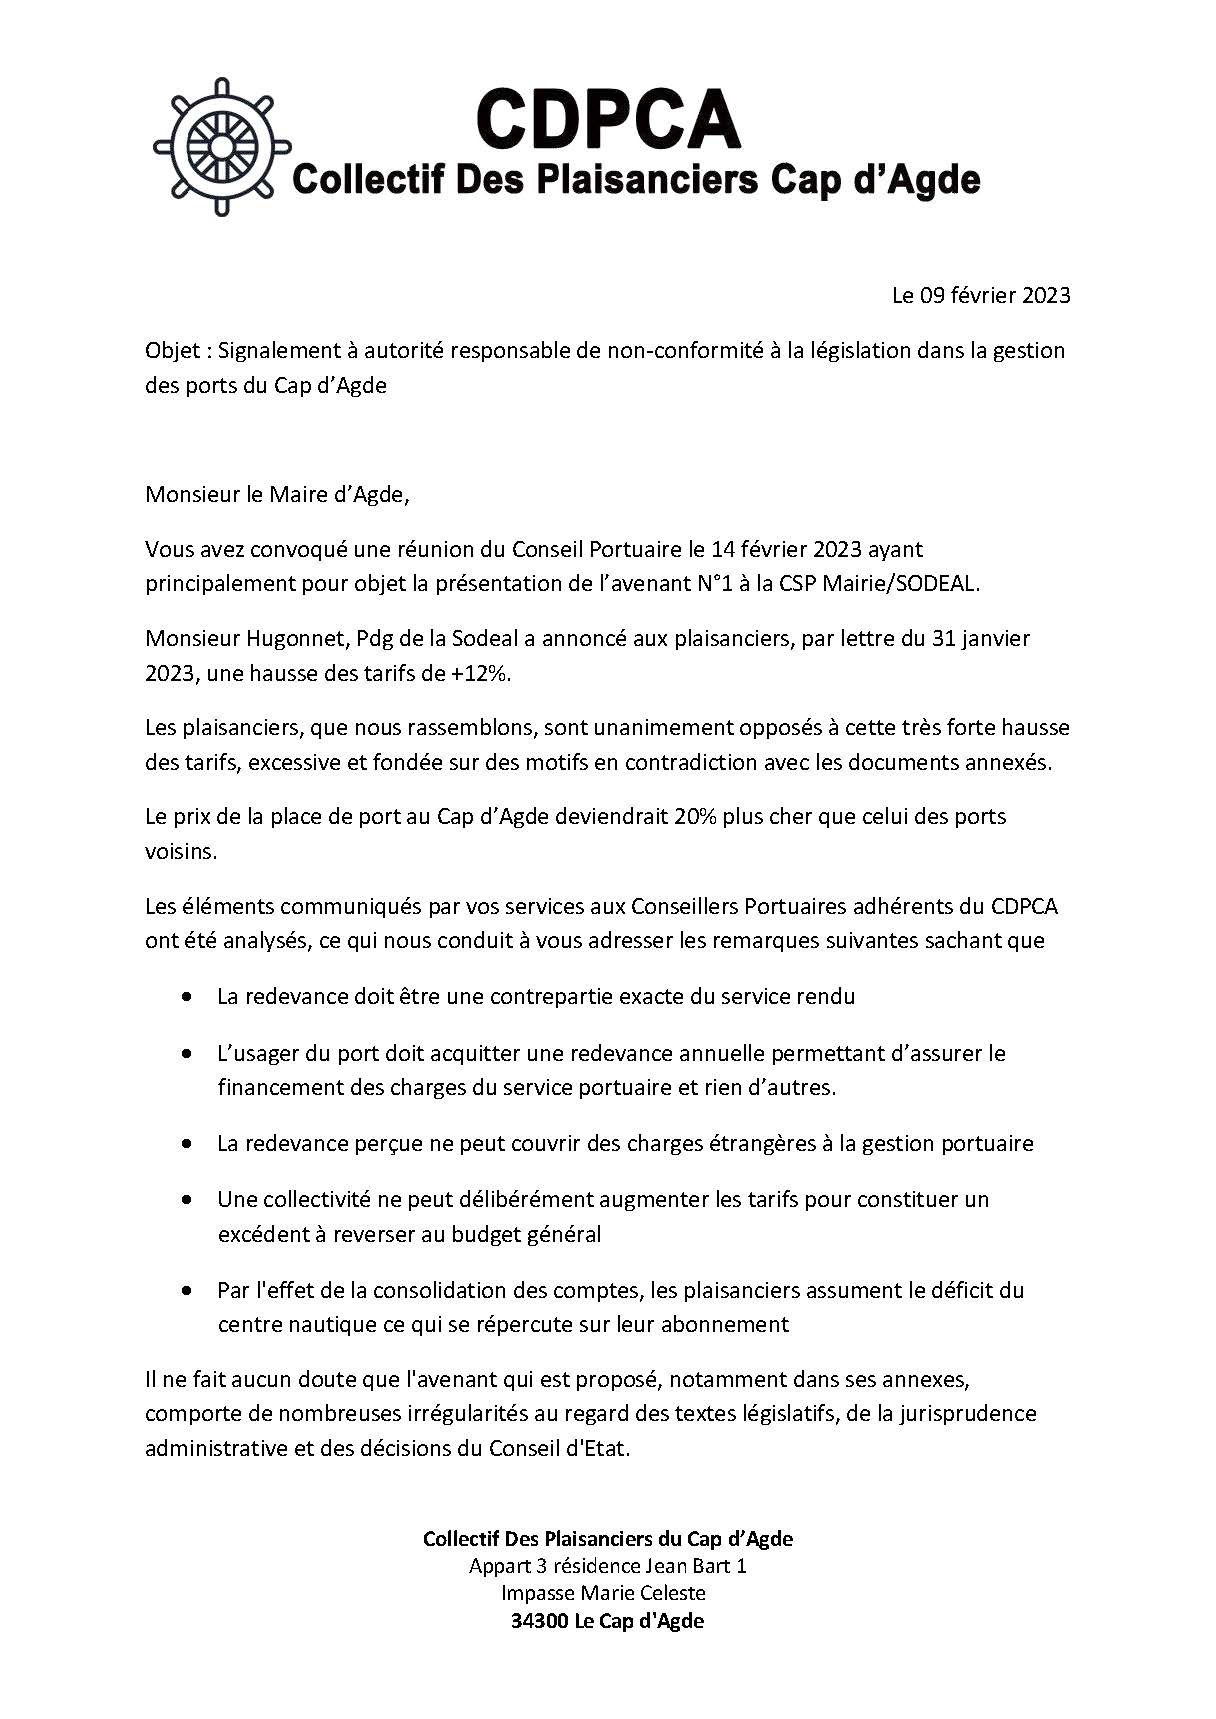 signalement_CDPCA_maire_09-fev-2023_Page_1.jpg